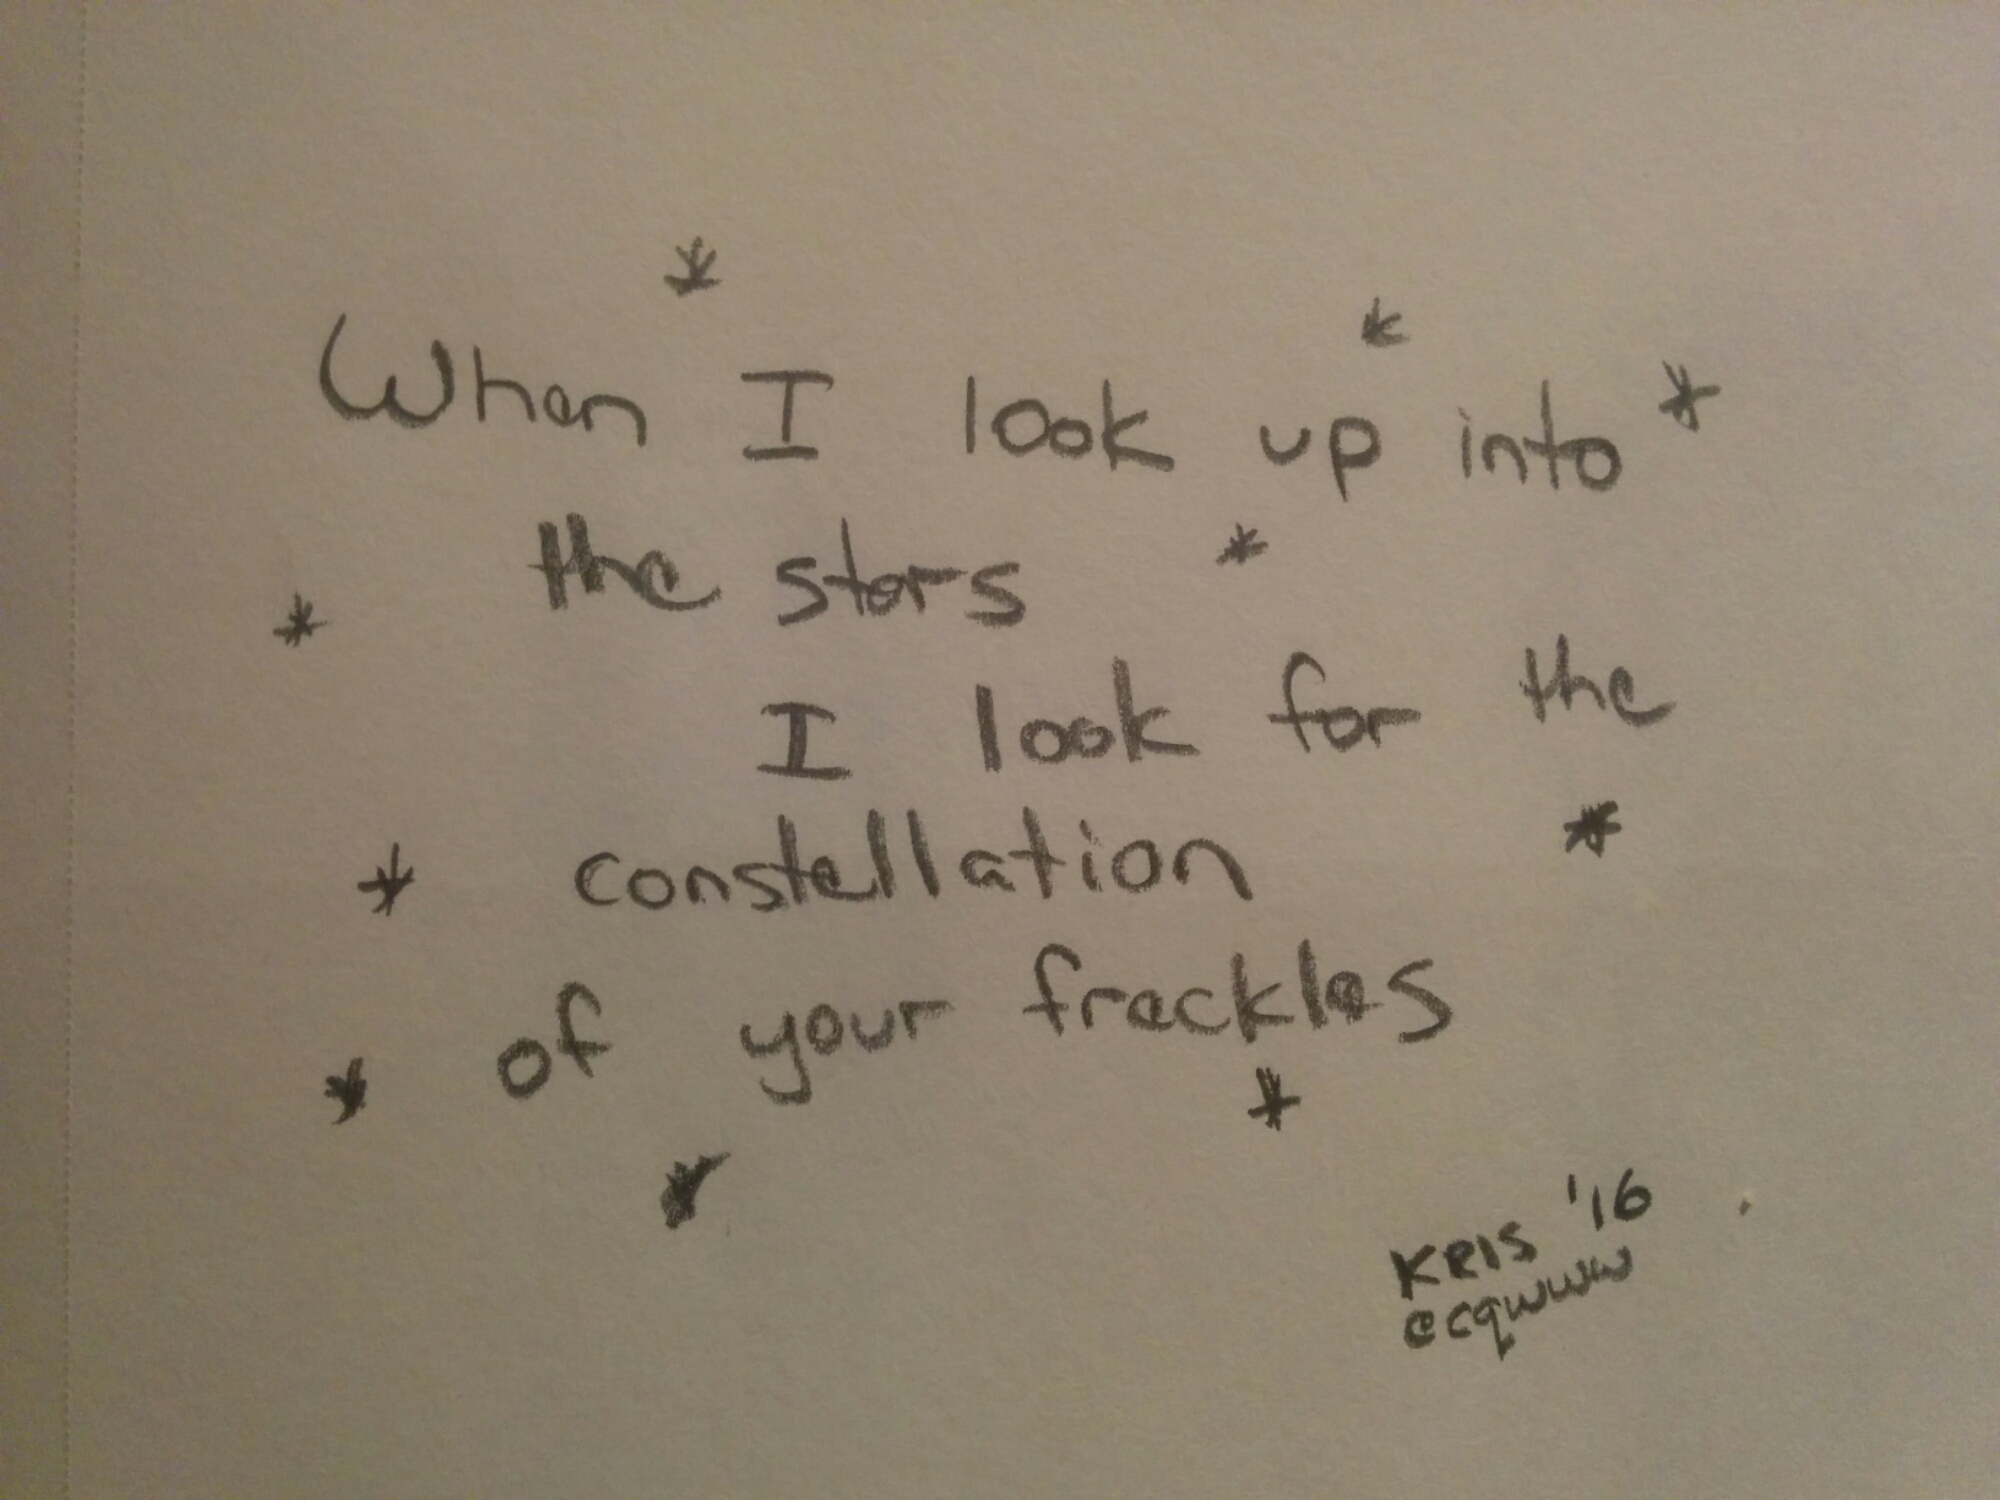 When I look up into the stars, I look for the constellation of your freckles